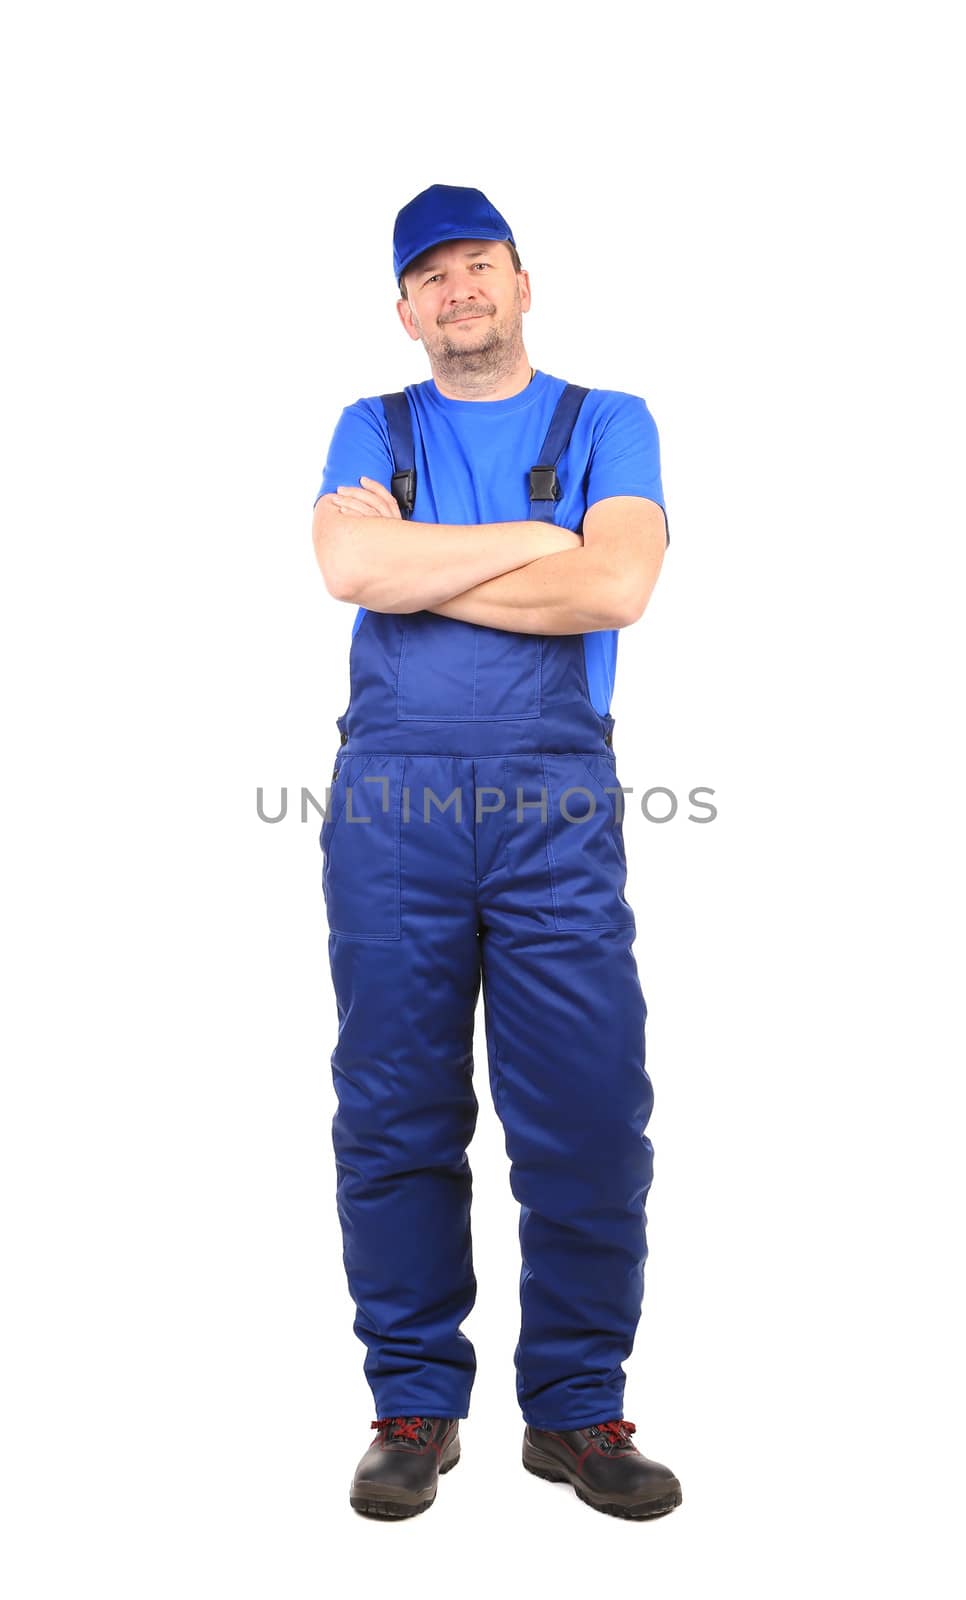 Smiling man in overall. Isolated on a white background.